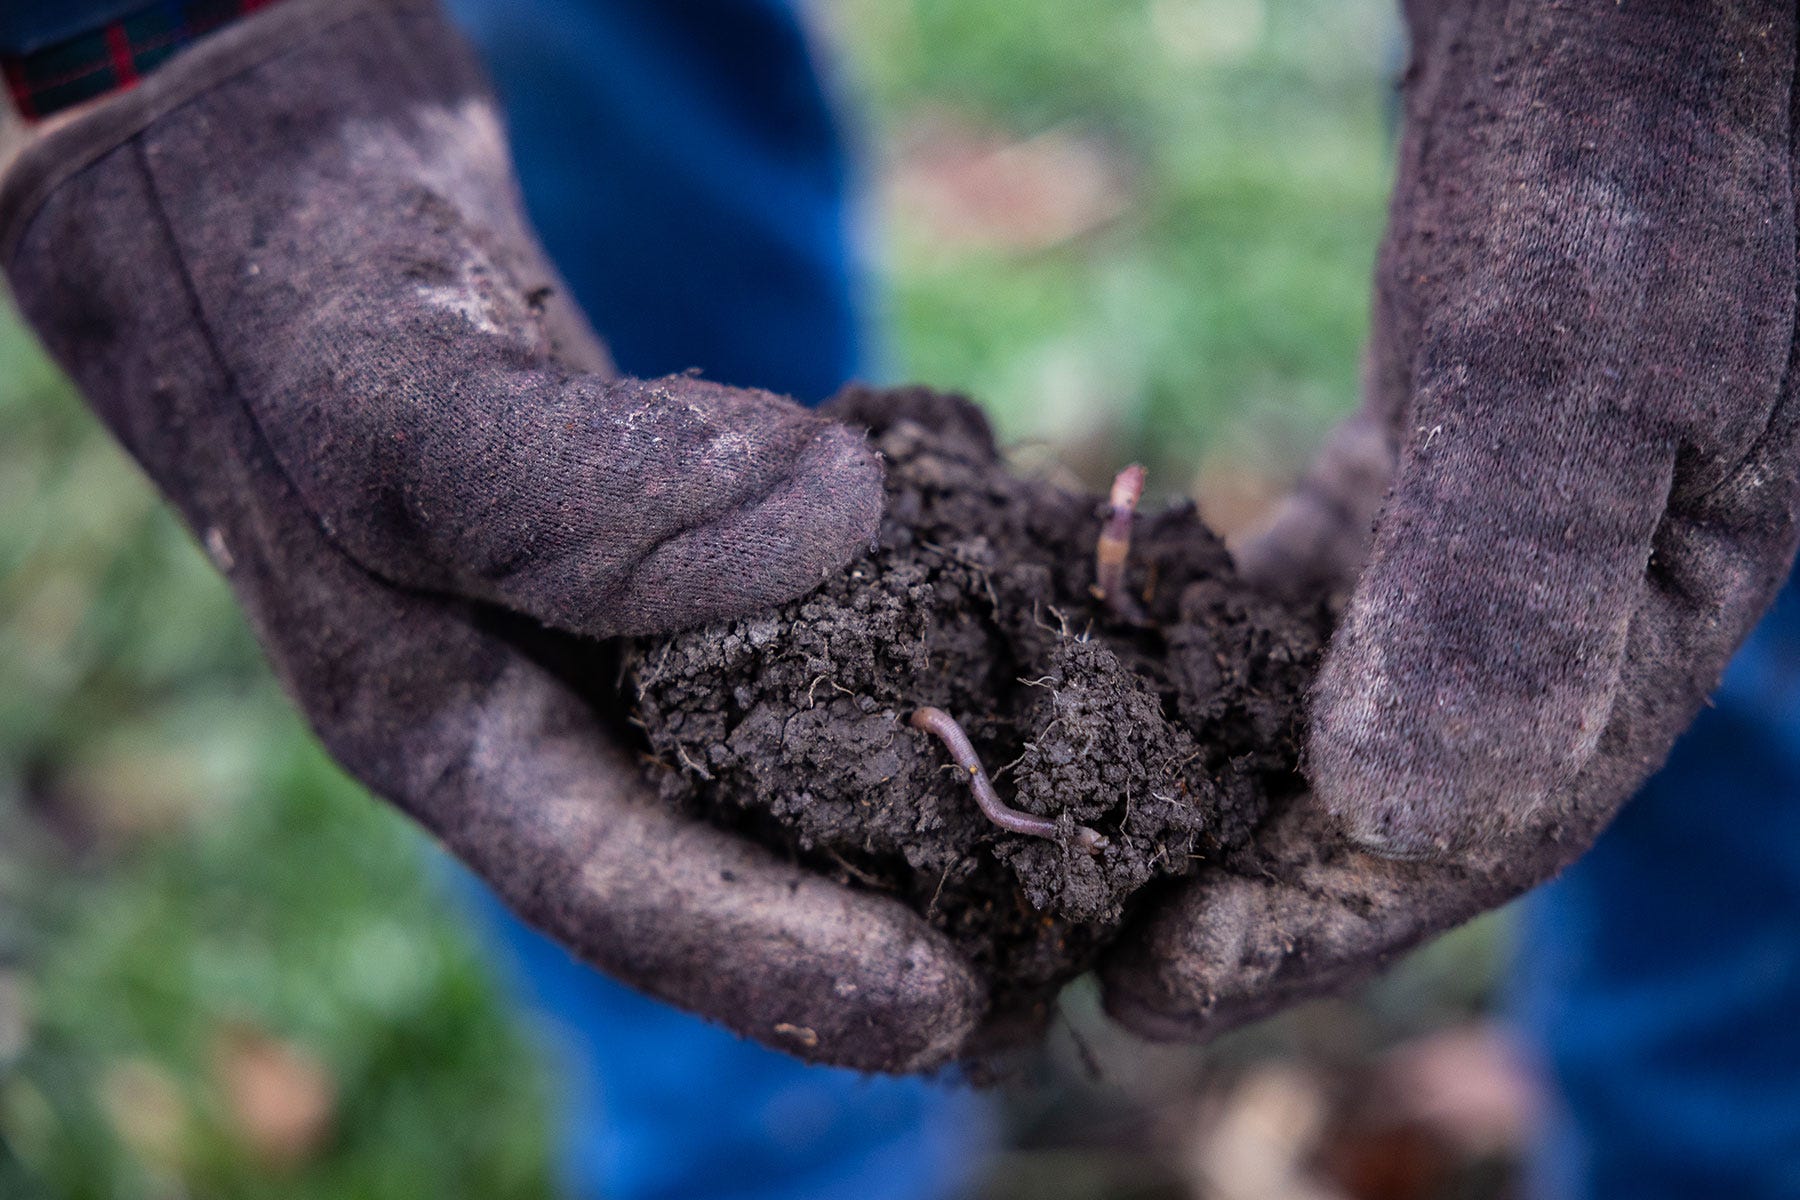 A close-up of gloved hands holding soil with earth worms poking through